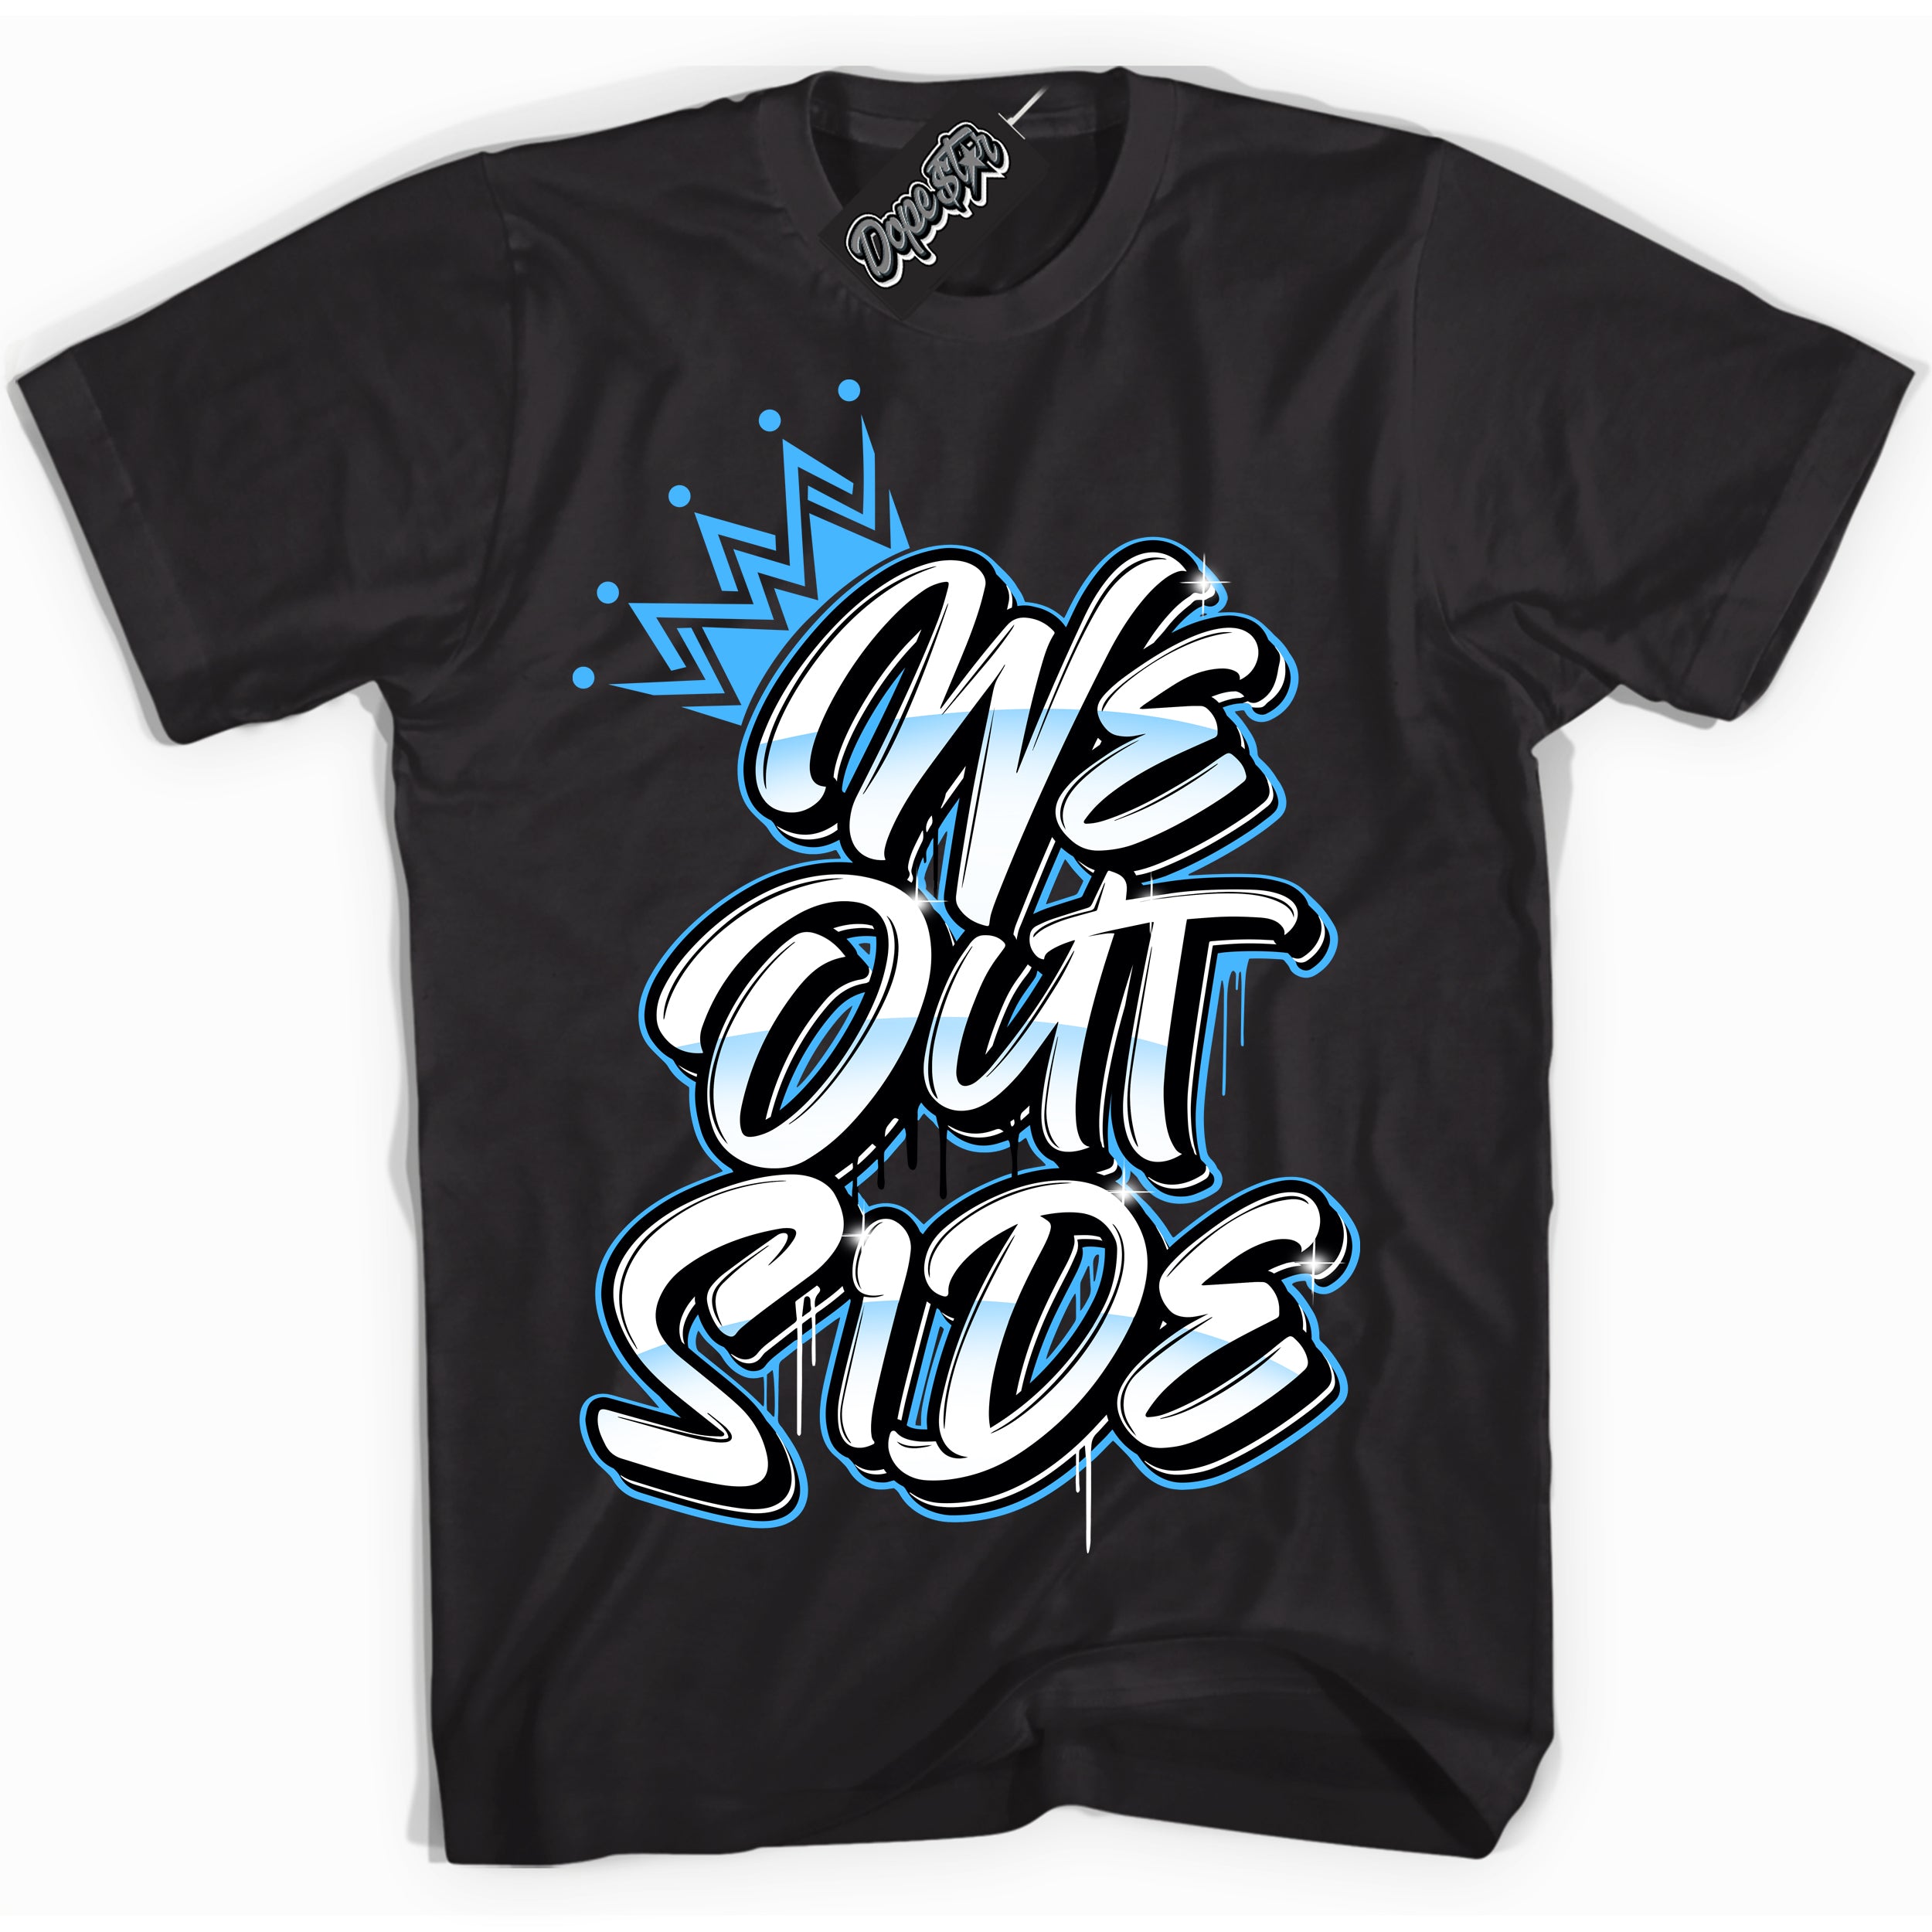 Cool Black graphic tee with “ We Outside ” design, that perfectly matches Powder Blue 9s sneakers 